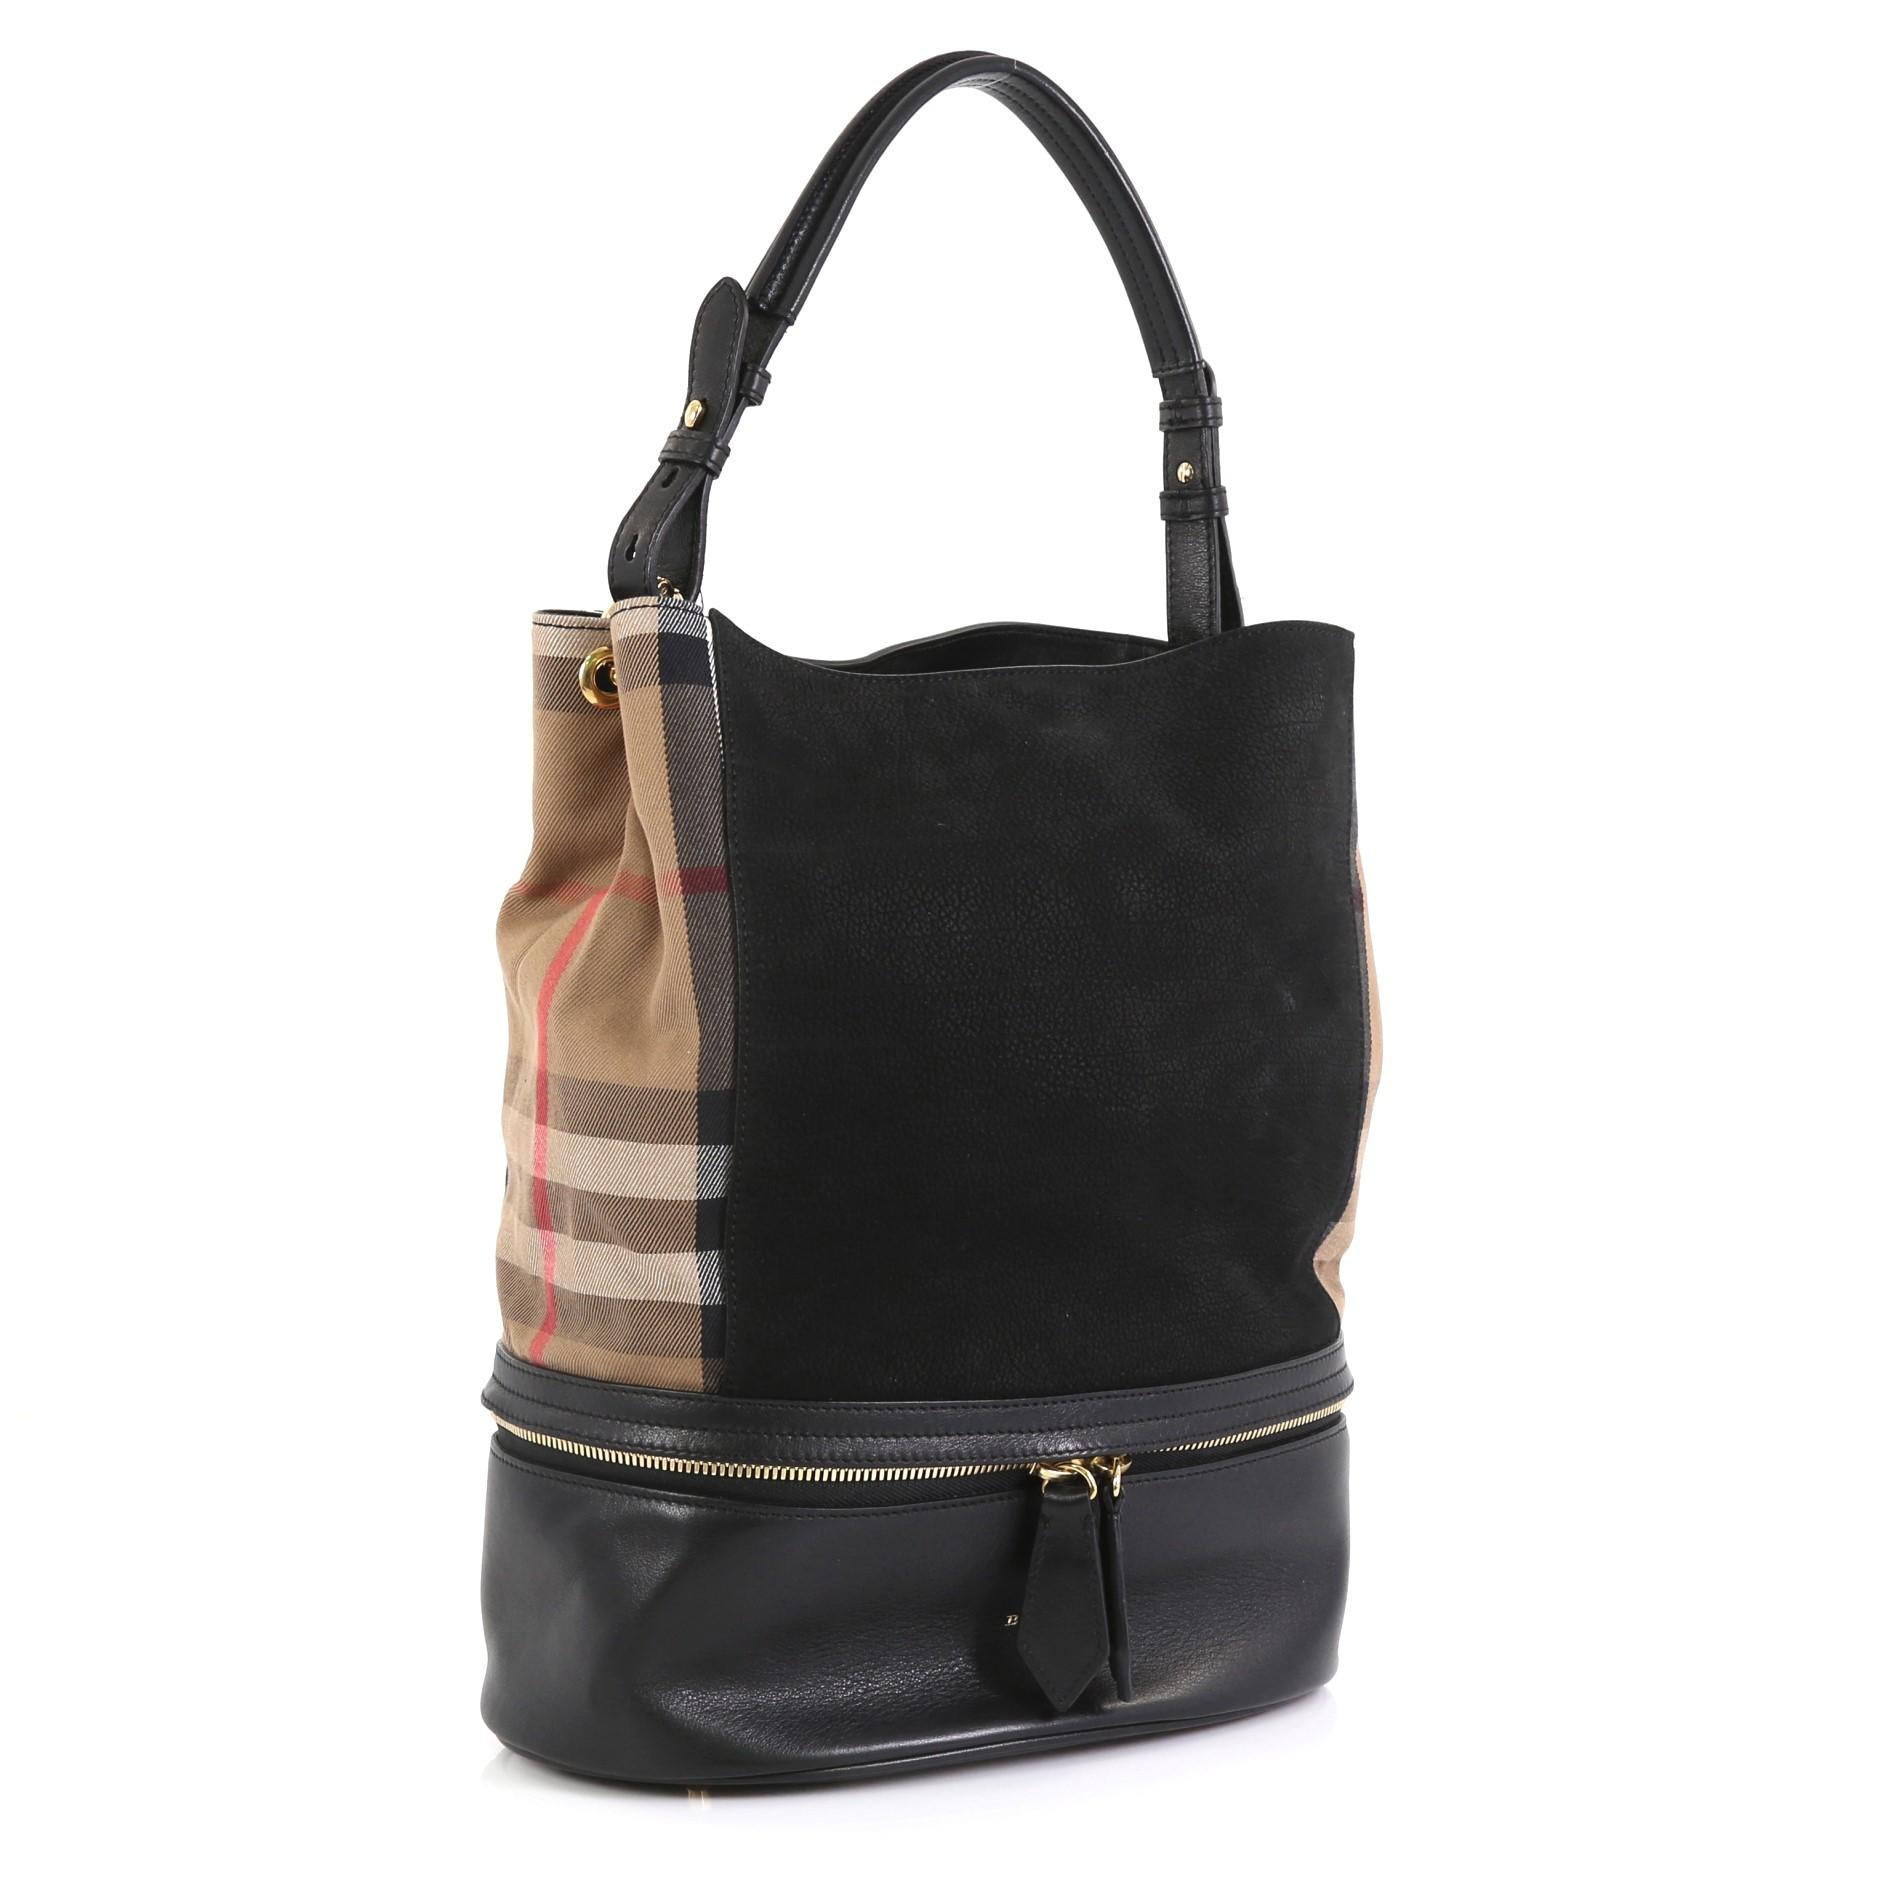 This Burberry Beckett Bucket Bag Nubuck with House Check Canvas Medium, crafted from black nubuck with Burberry House Check sides and a leather base, features an adjustable padded top handle, zip-around bottom compartment with embossed logo,